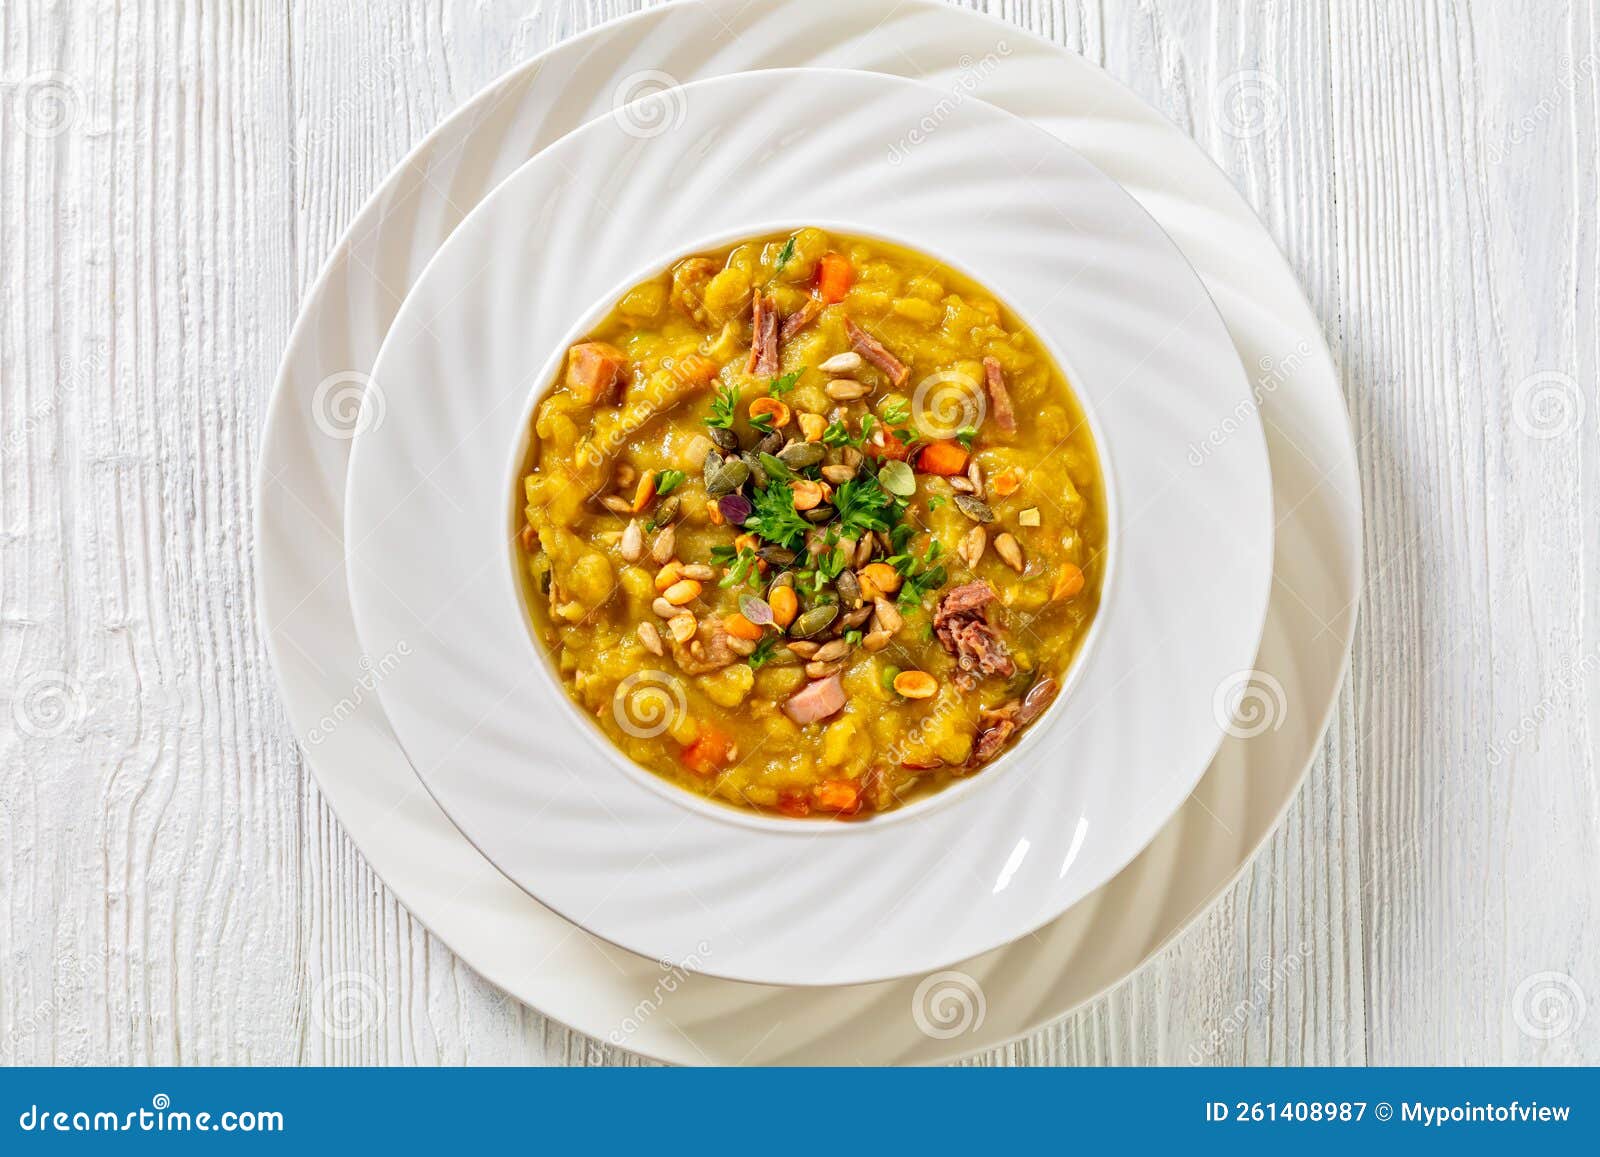 Finnish Split Pea Soup Hernekeitto with Pork Meat Stock Image - Image ...